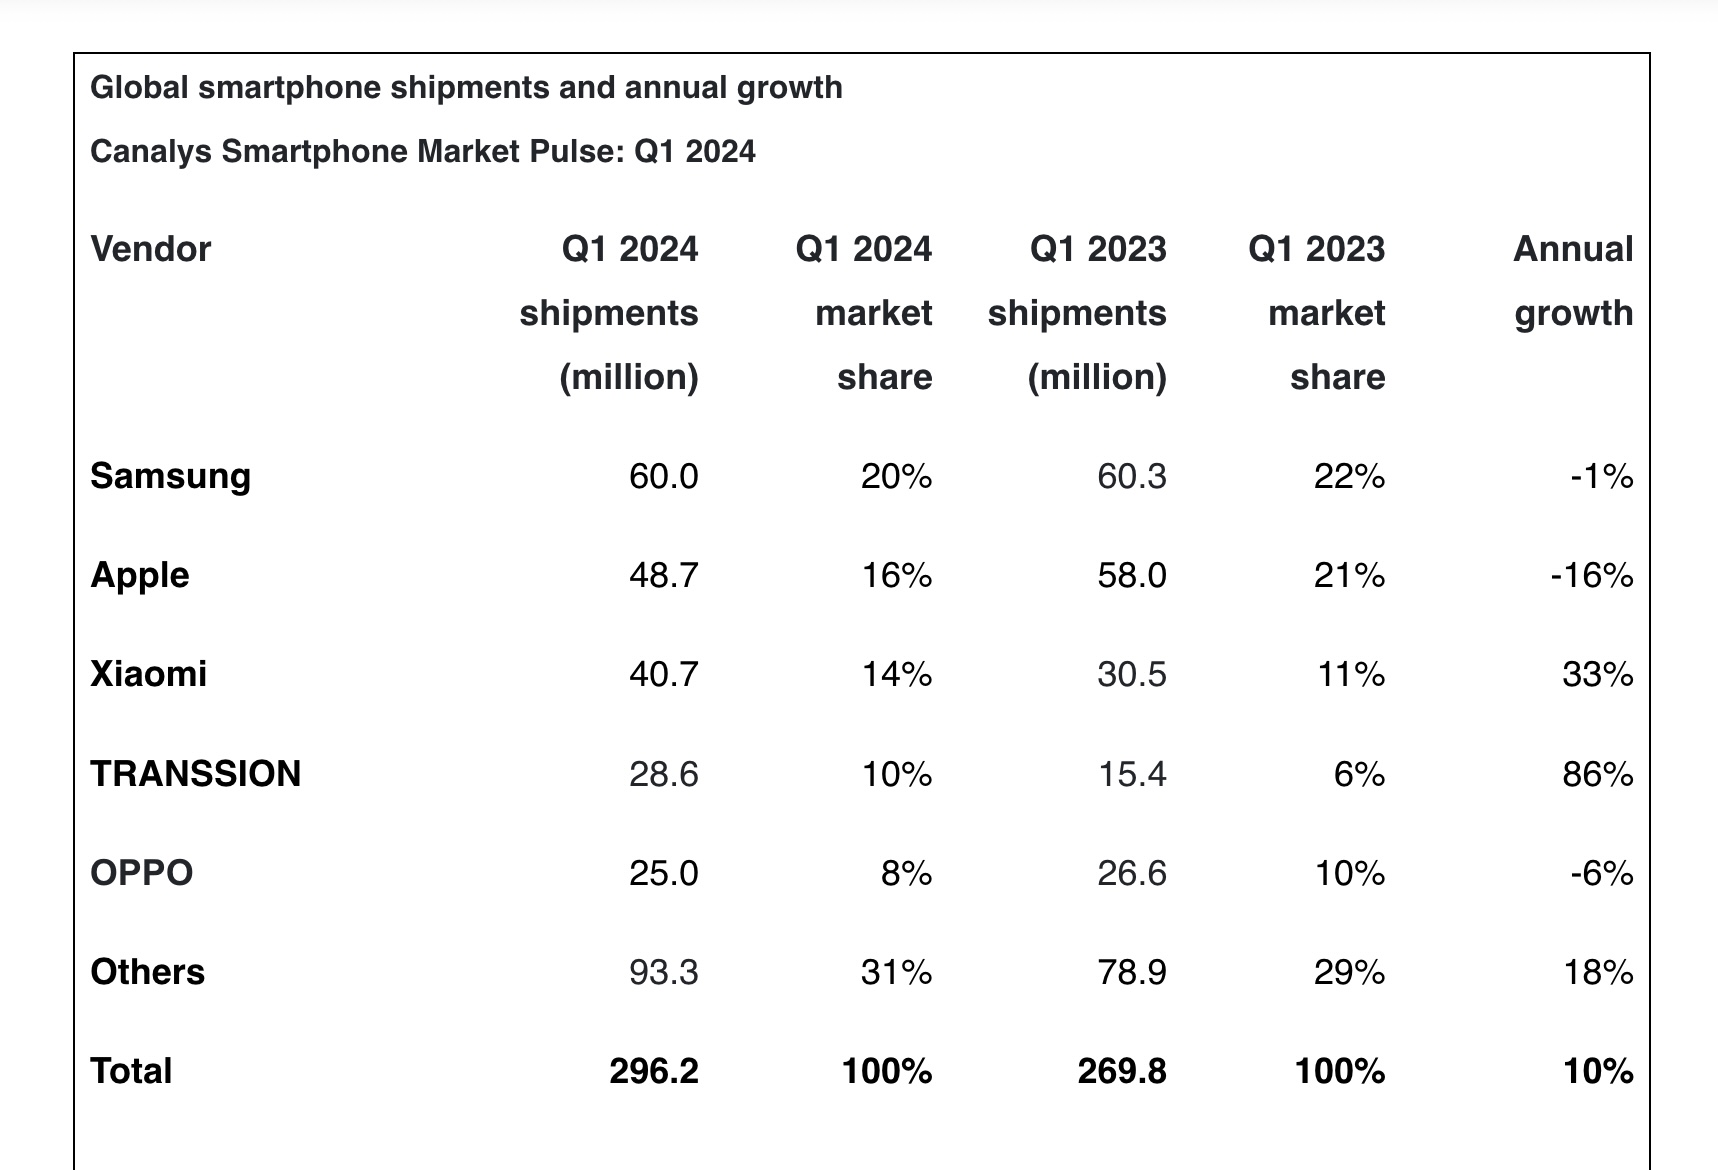 Canalys: Global smartphone shipments up 10% in Q1, Samsung regains top spot